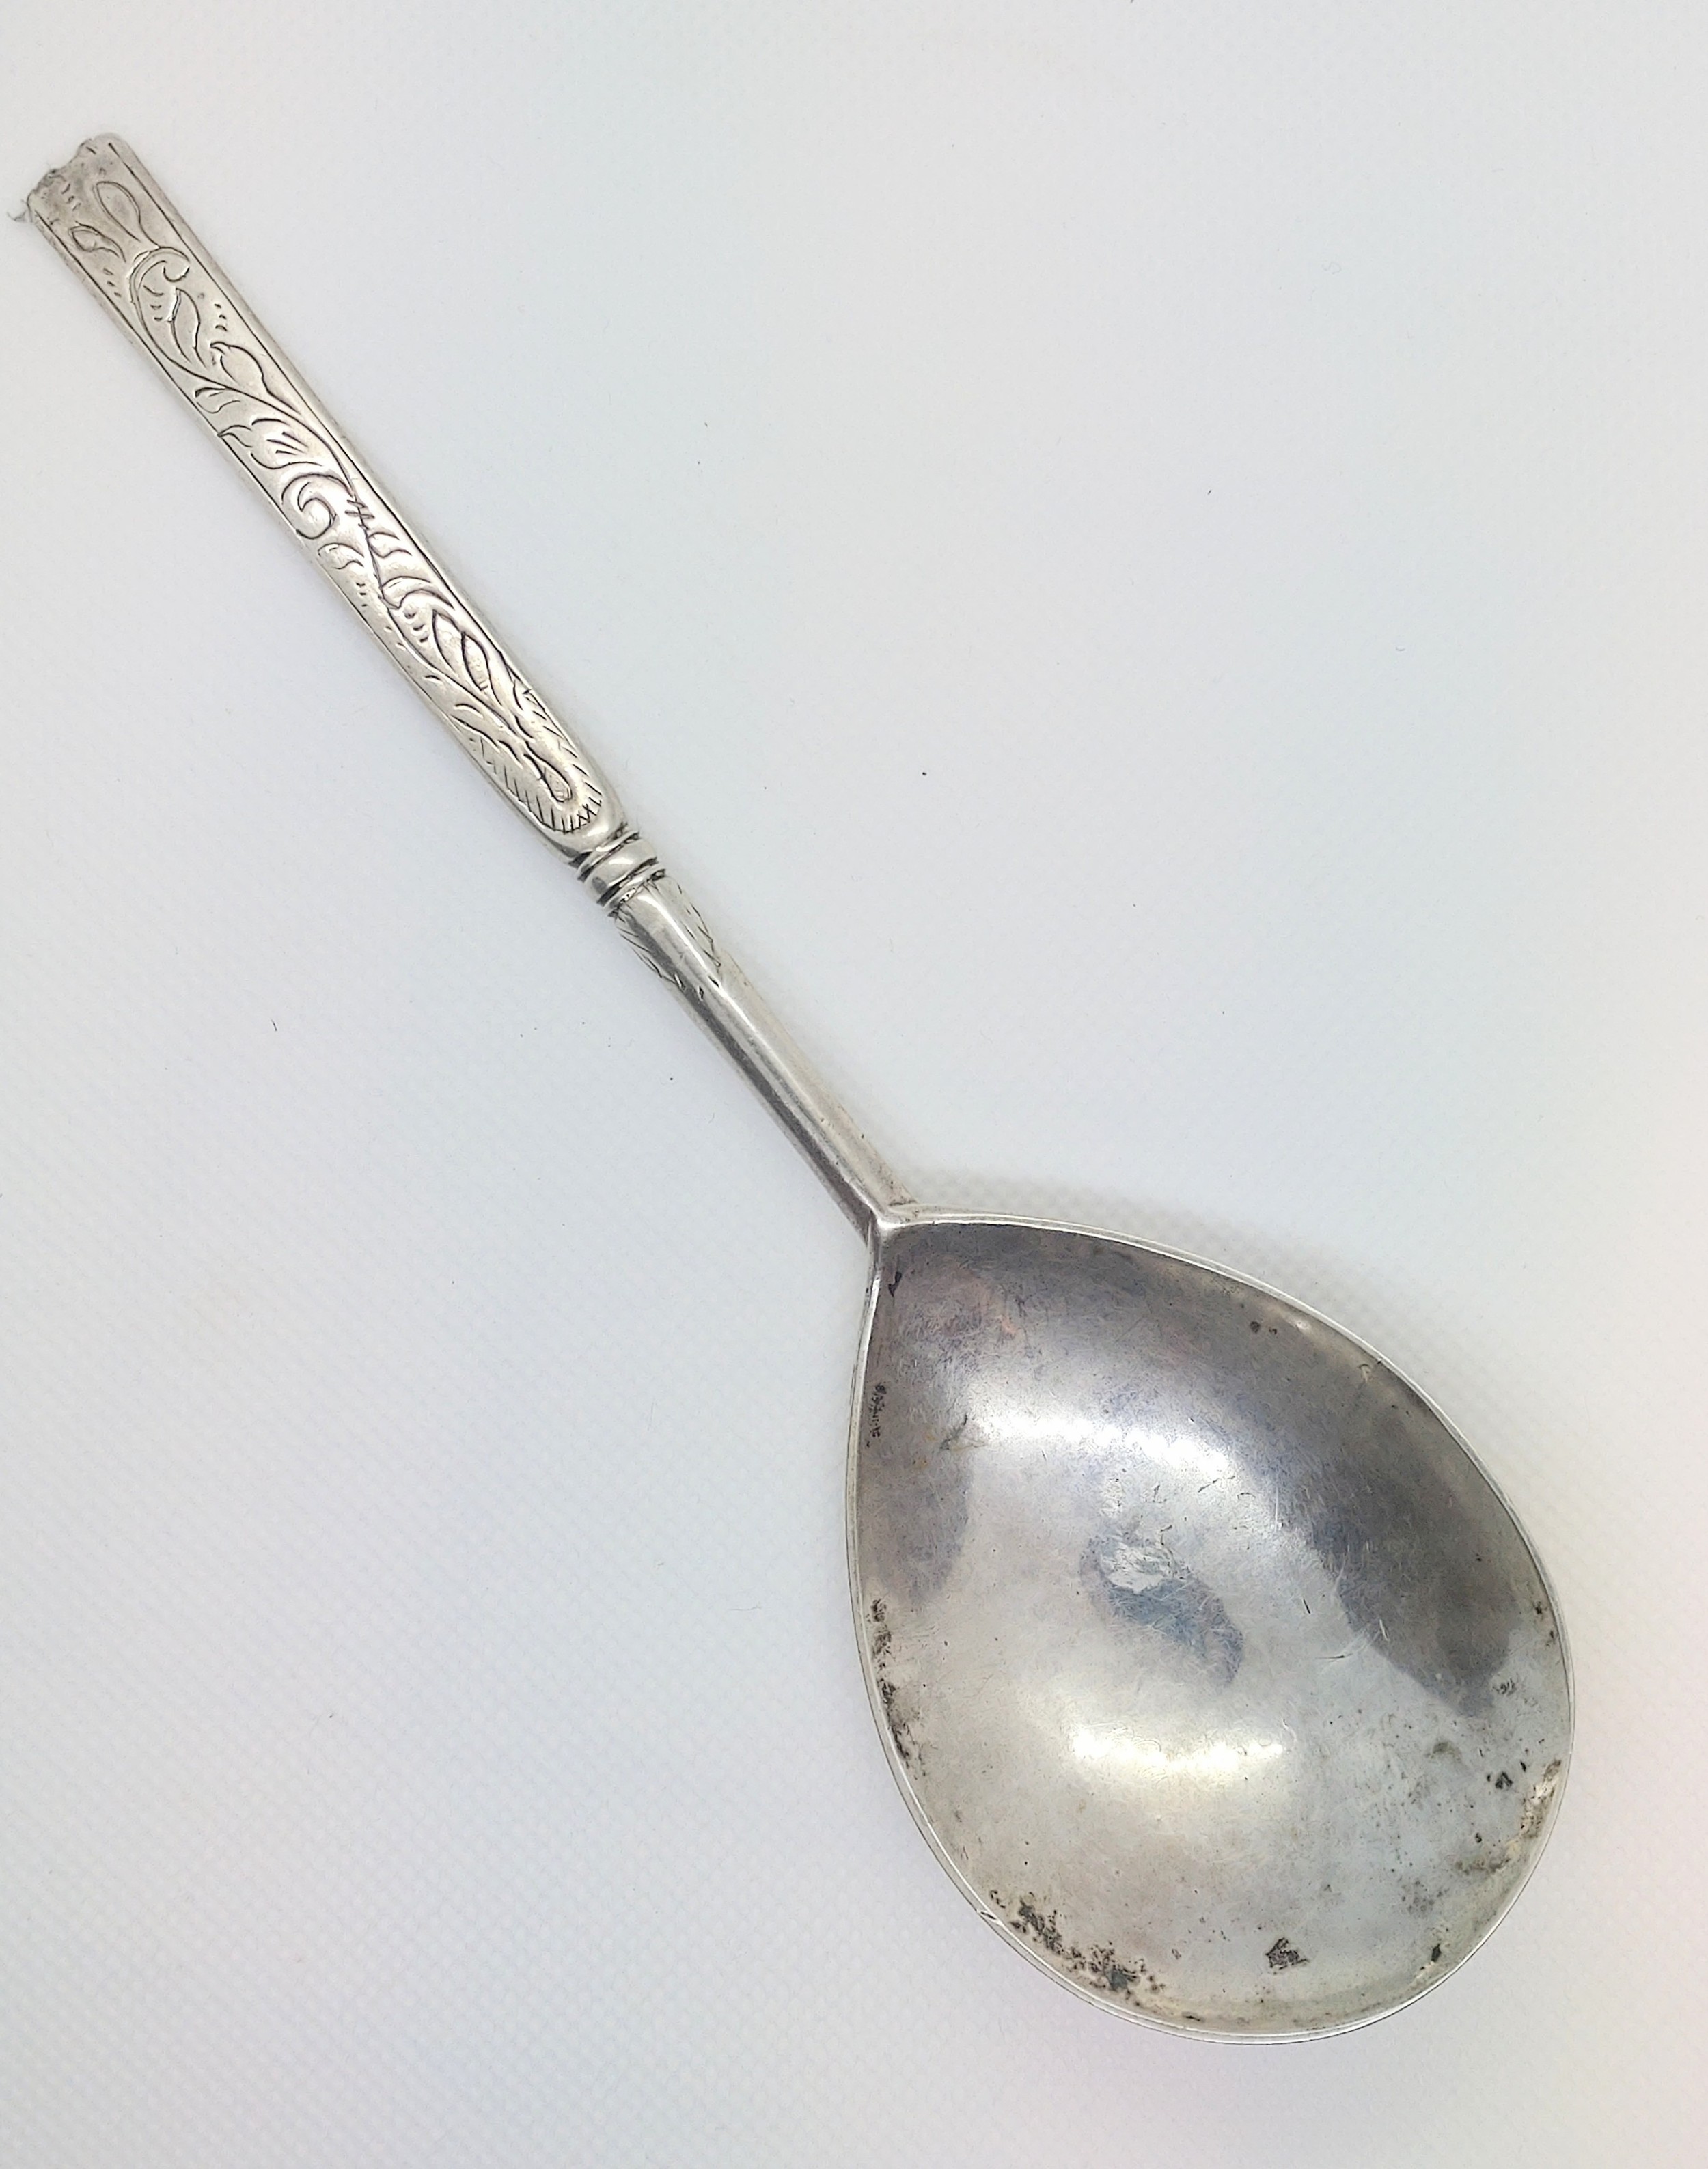 An 18th century Scandinavian silver spoon engraved with scrolling foliage and groups of initials.